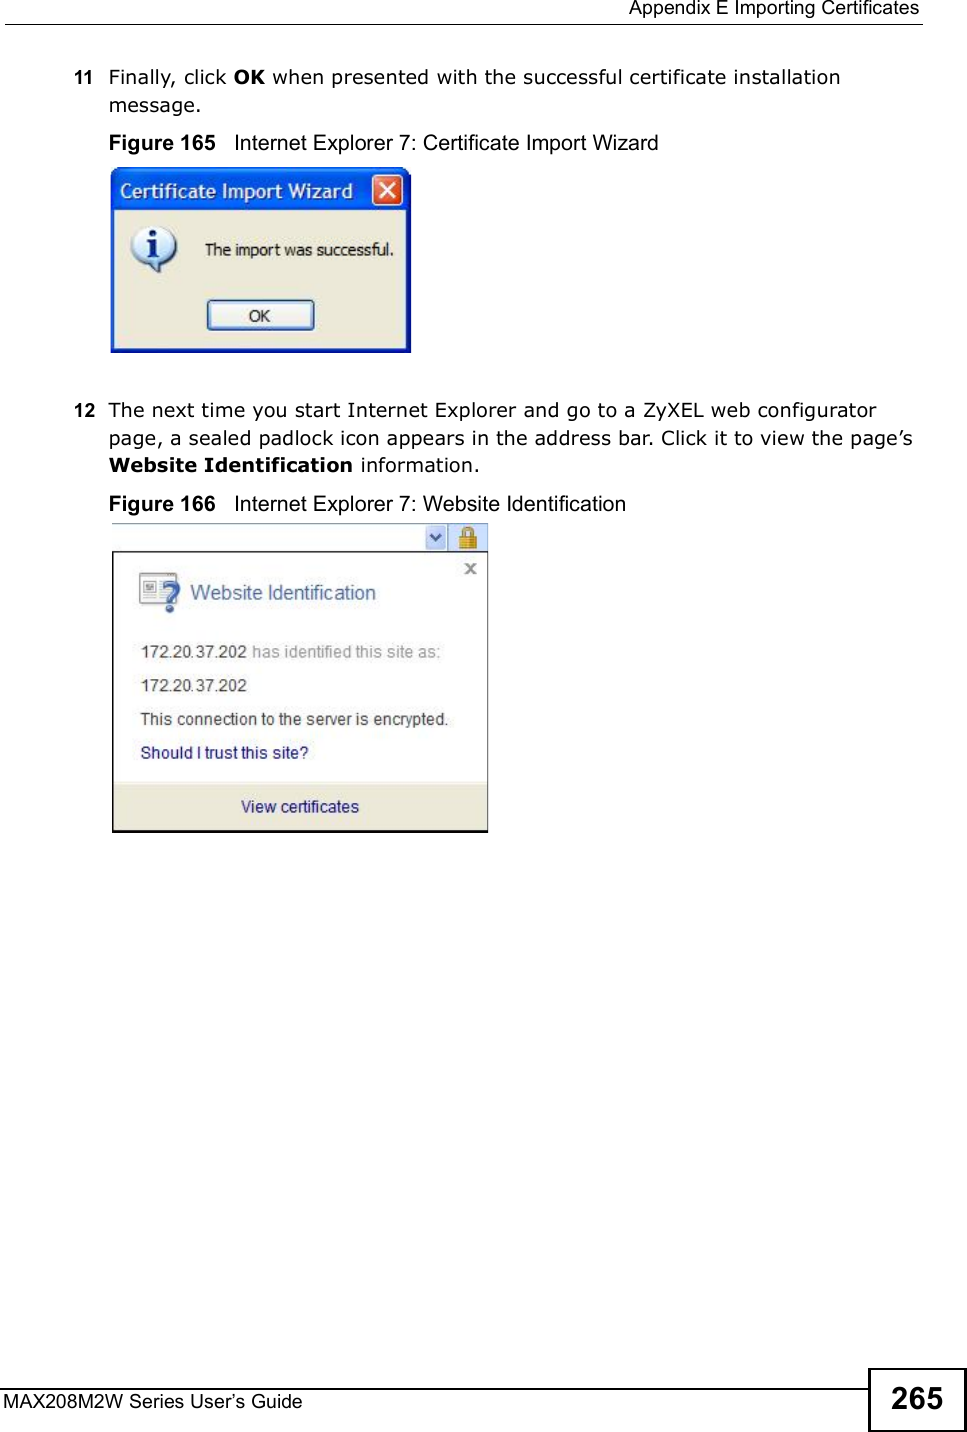  Appendix EImporting CertificatesMAX208M2W Series User s Guide 26511 Finally, click OK when presented with the successful certificate installation message.Figure 165   Internet Explorer 7: Certificate Import Wizard12 The next time you start Internet Explorer and go to a ZyXEL web configurator page, a sealed padlock icon appears in the address bar. Click it to view the page s Website Identification information.Figure 166   Internet Explorer 7: Website Identification